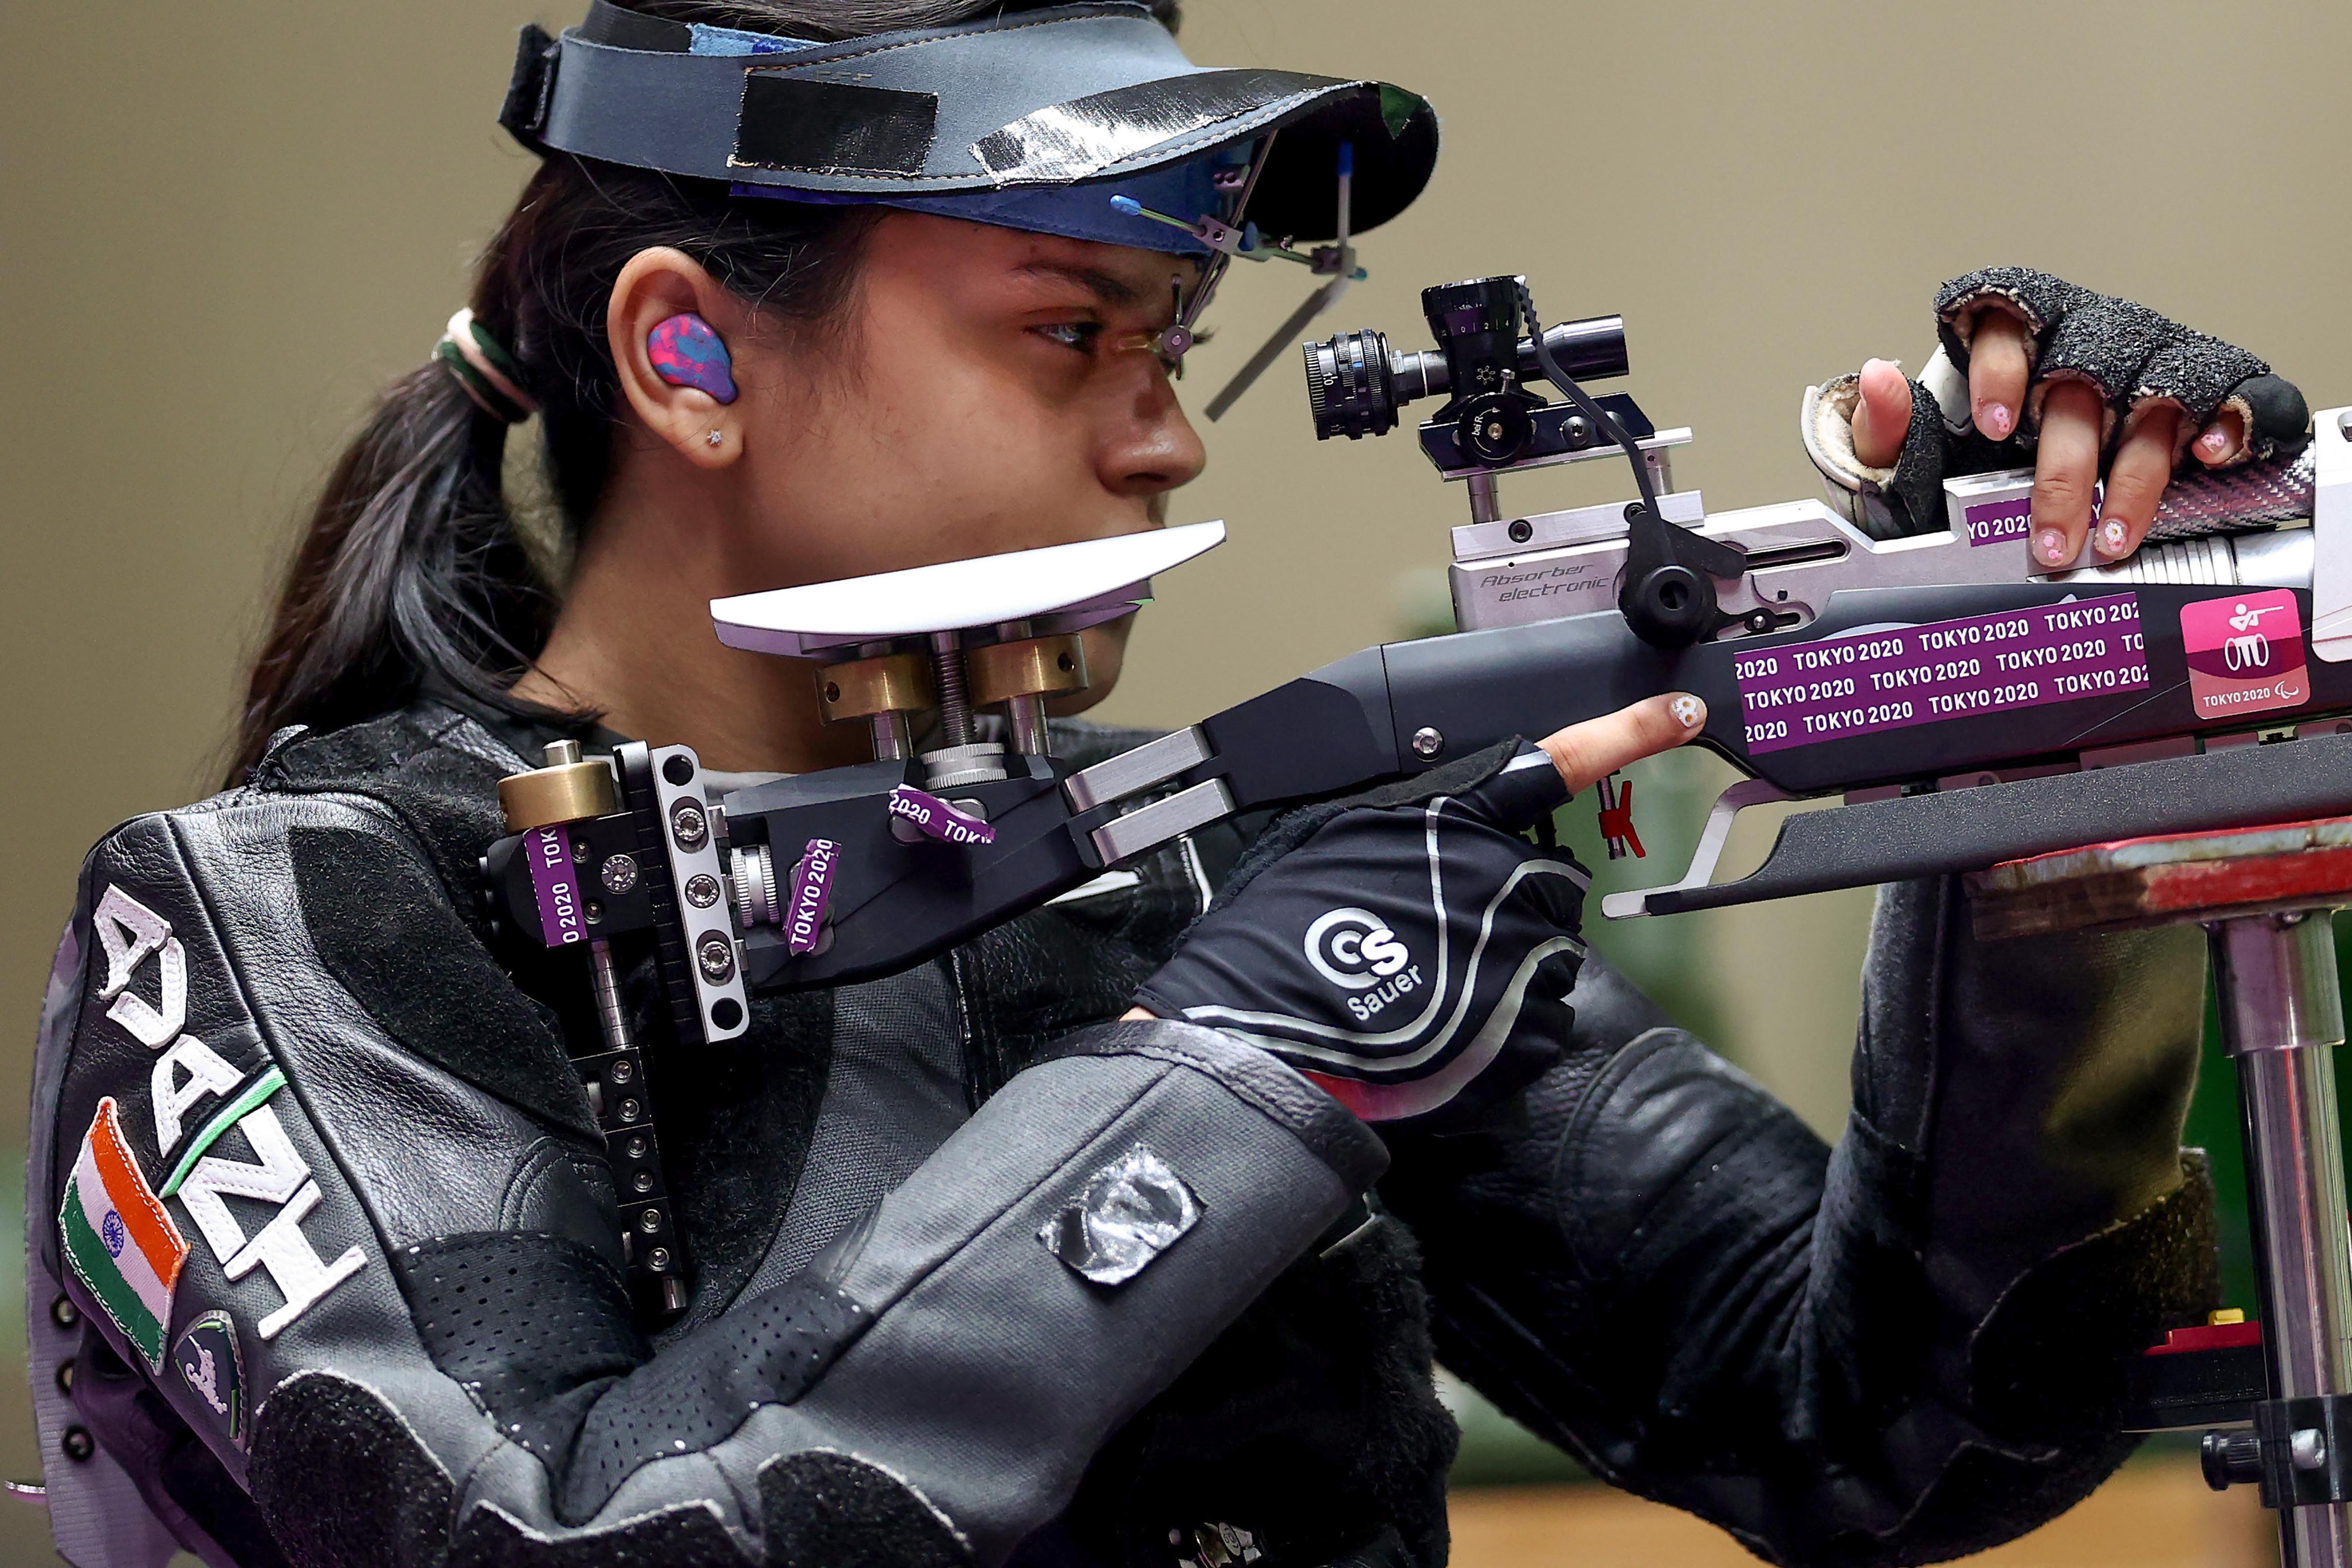 Avani Lekhara - Indian shooter Avani Lekhara was on a roll as she first won a historic gold medal in the Women's 10m air rifle standing SH1 and later bagged a bronze medal in the R8 women's 50m rifle 3P SH1 event at the Tokyo Paralympics